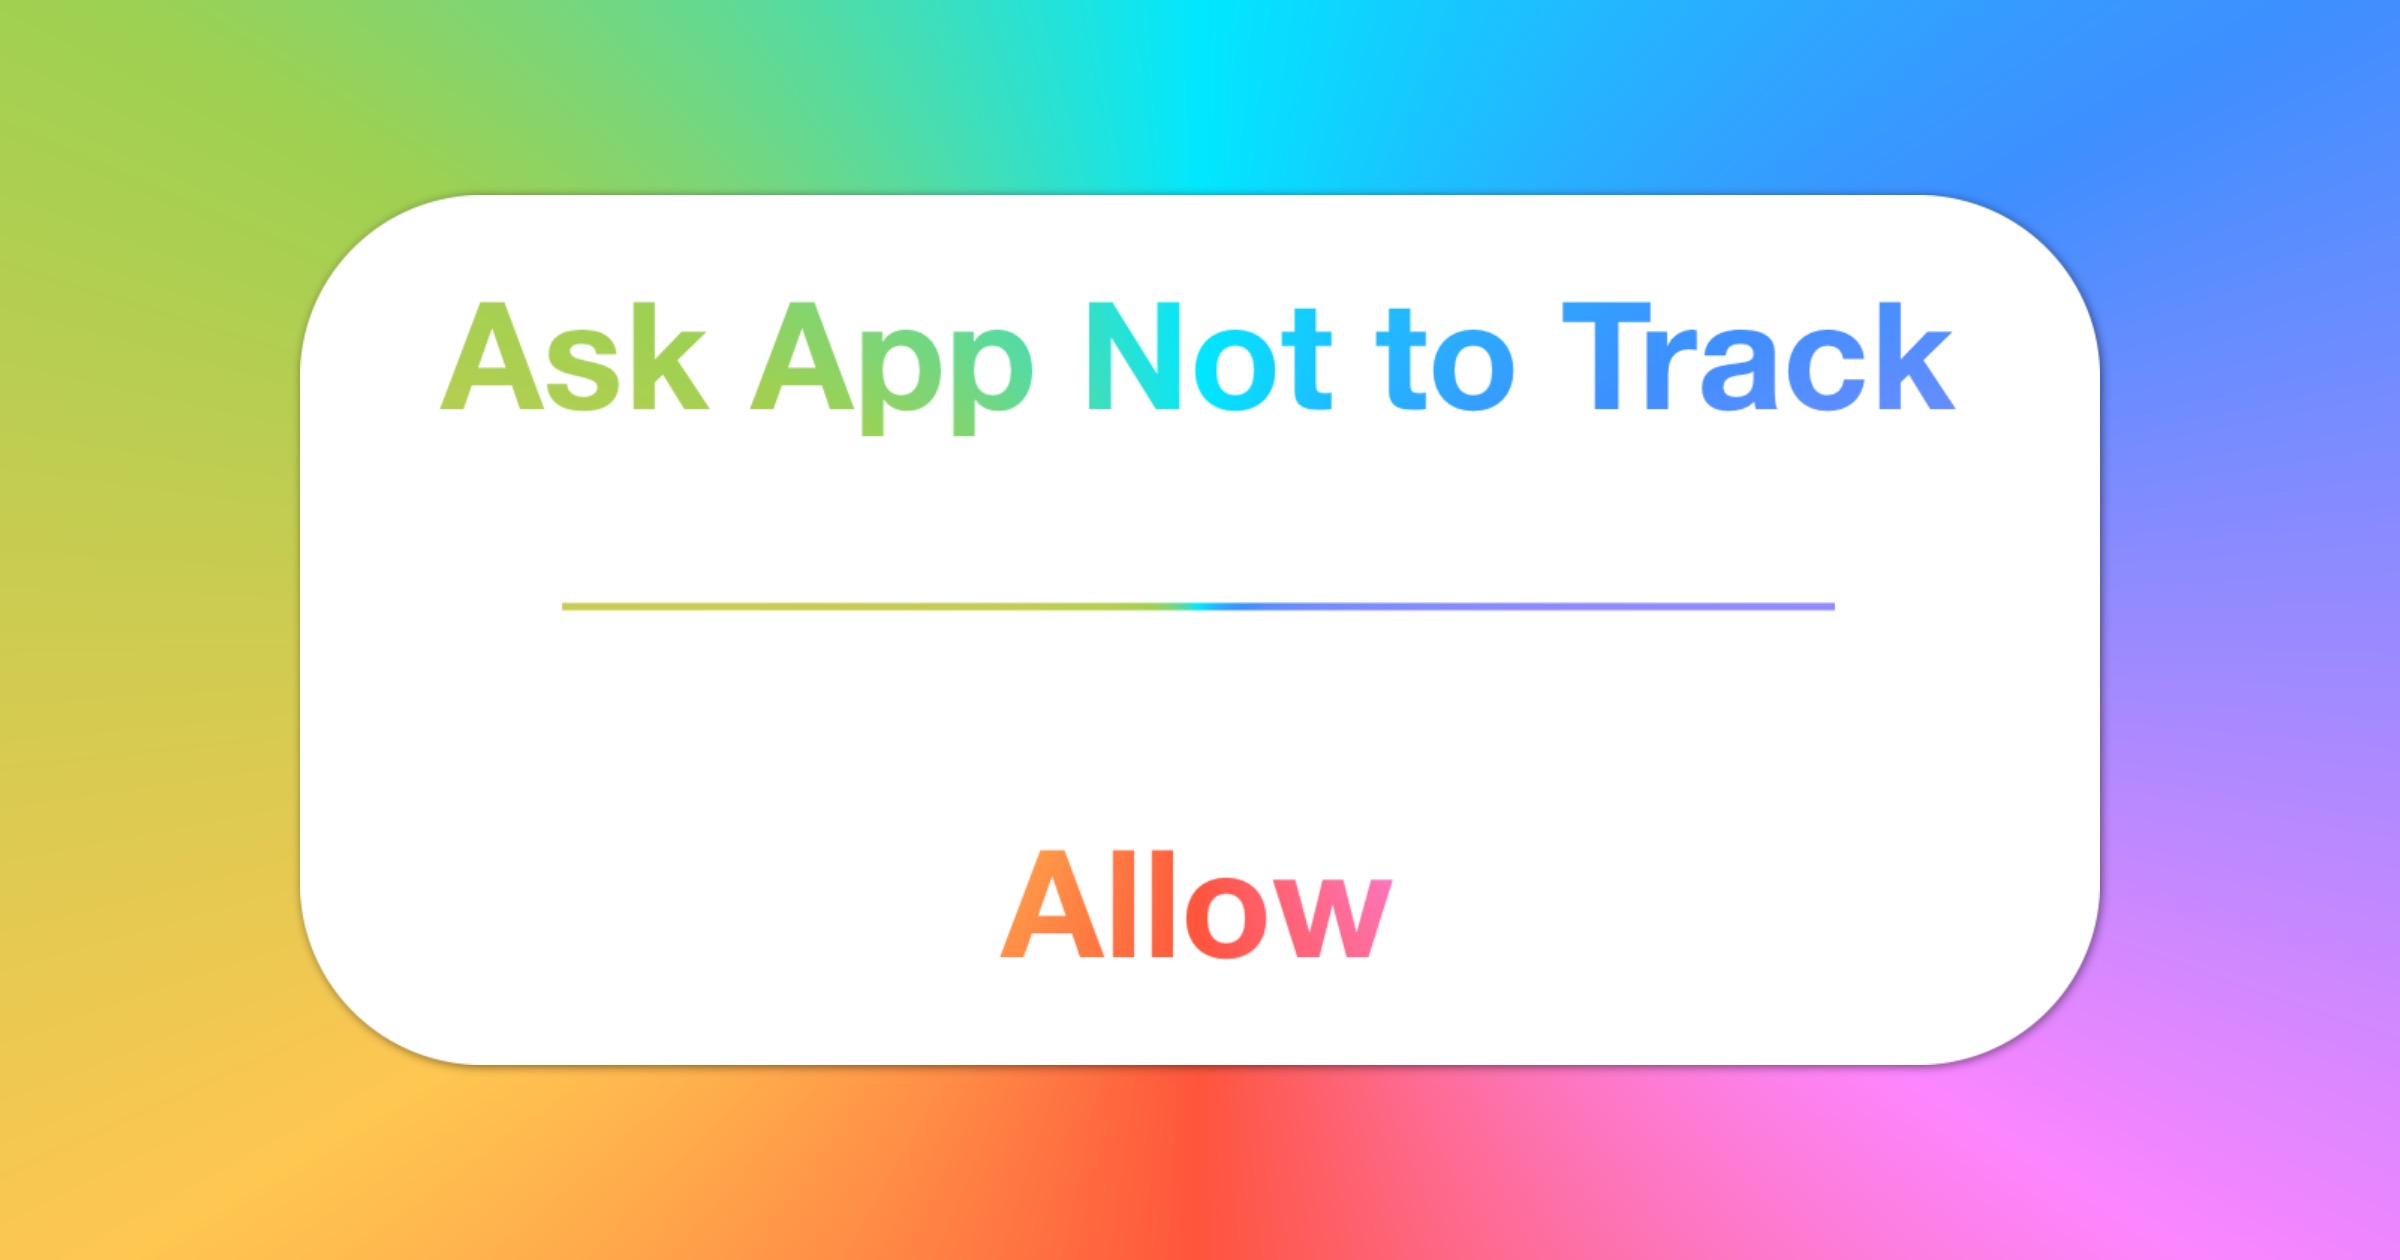 App tracking transparency in iOS 14.5